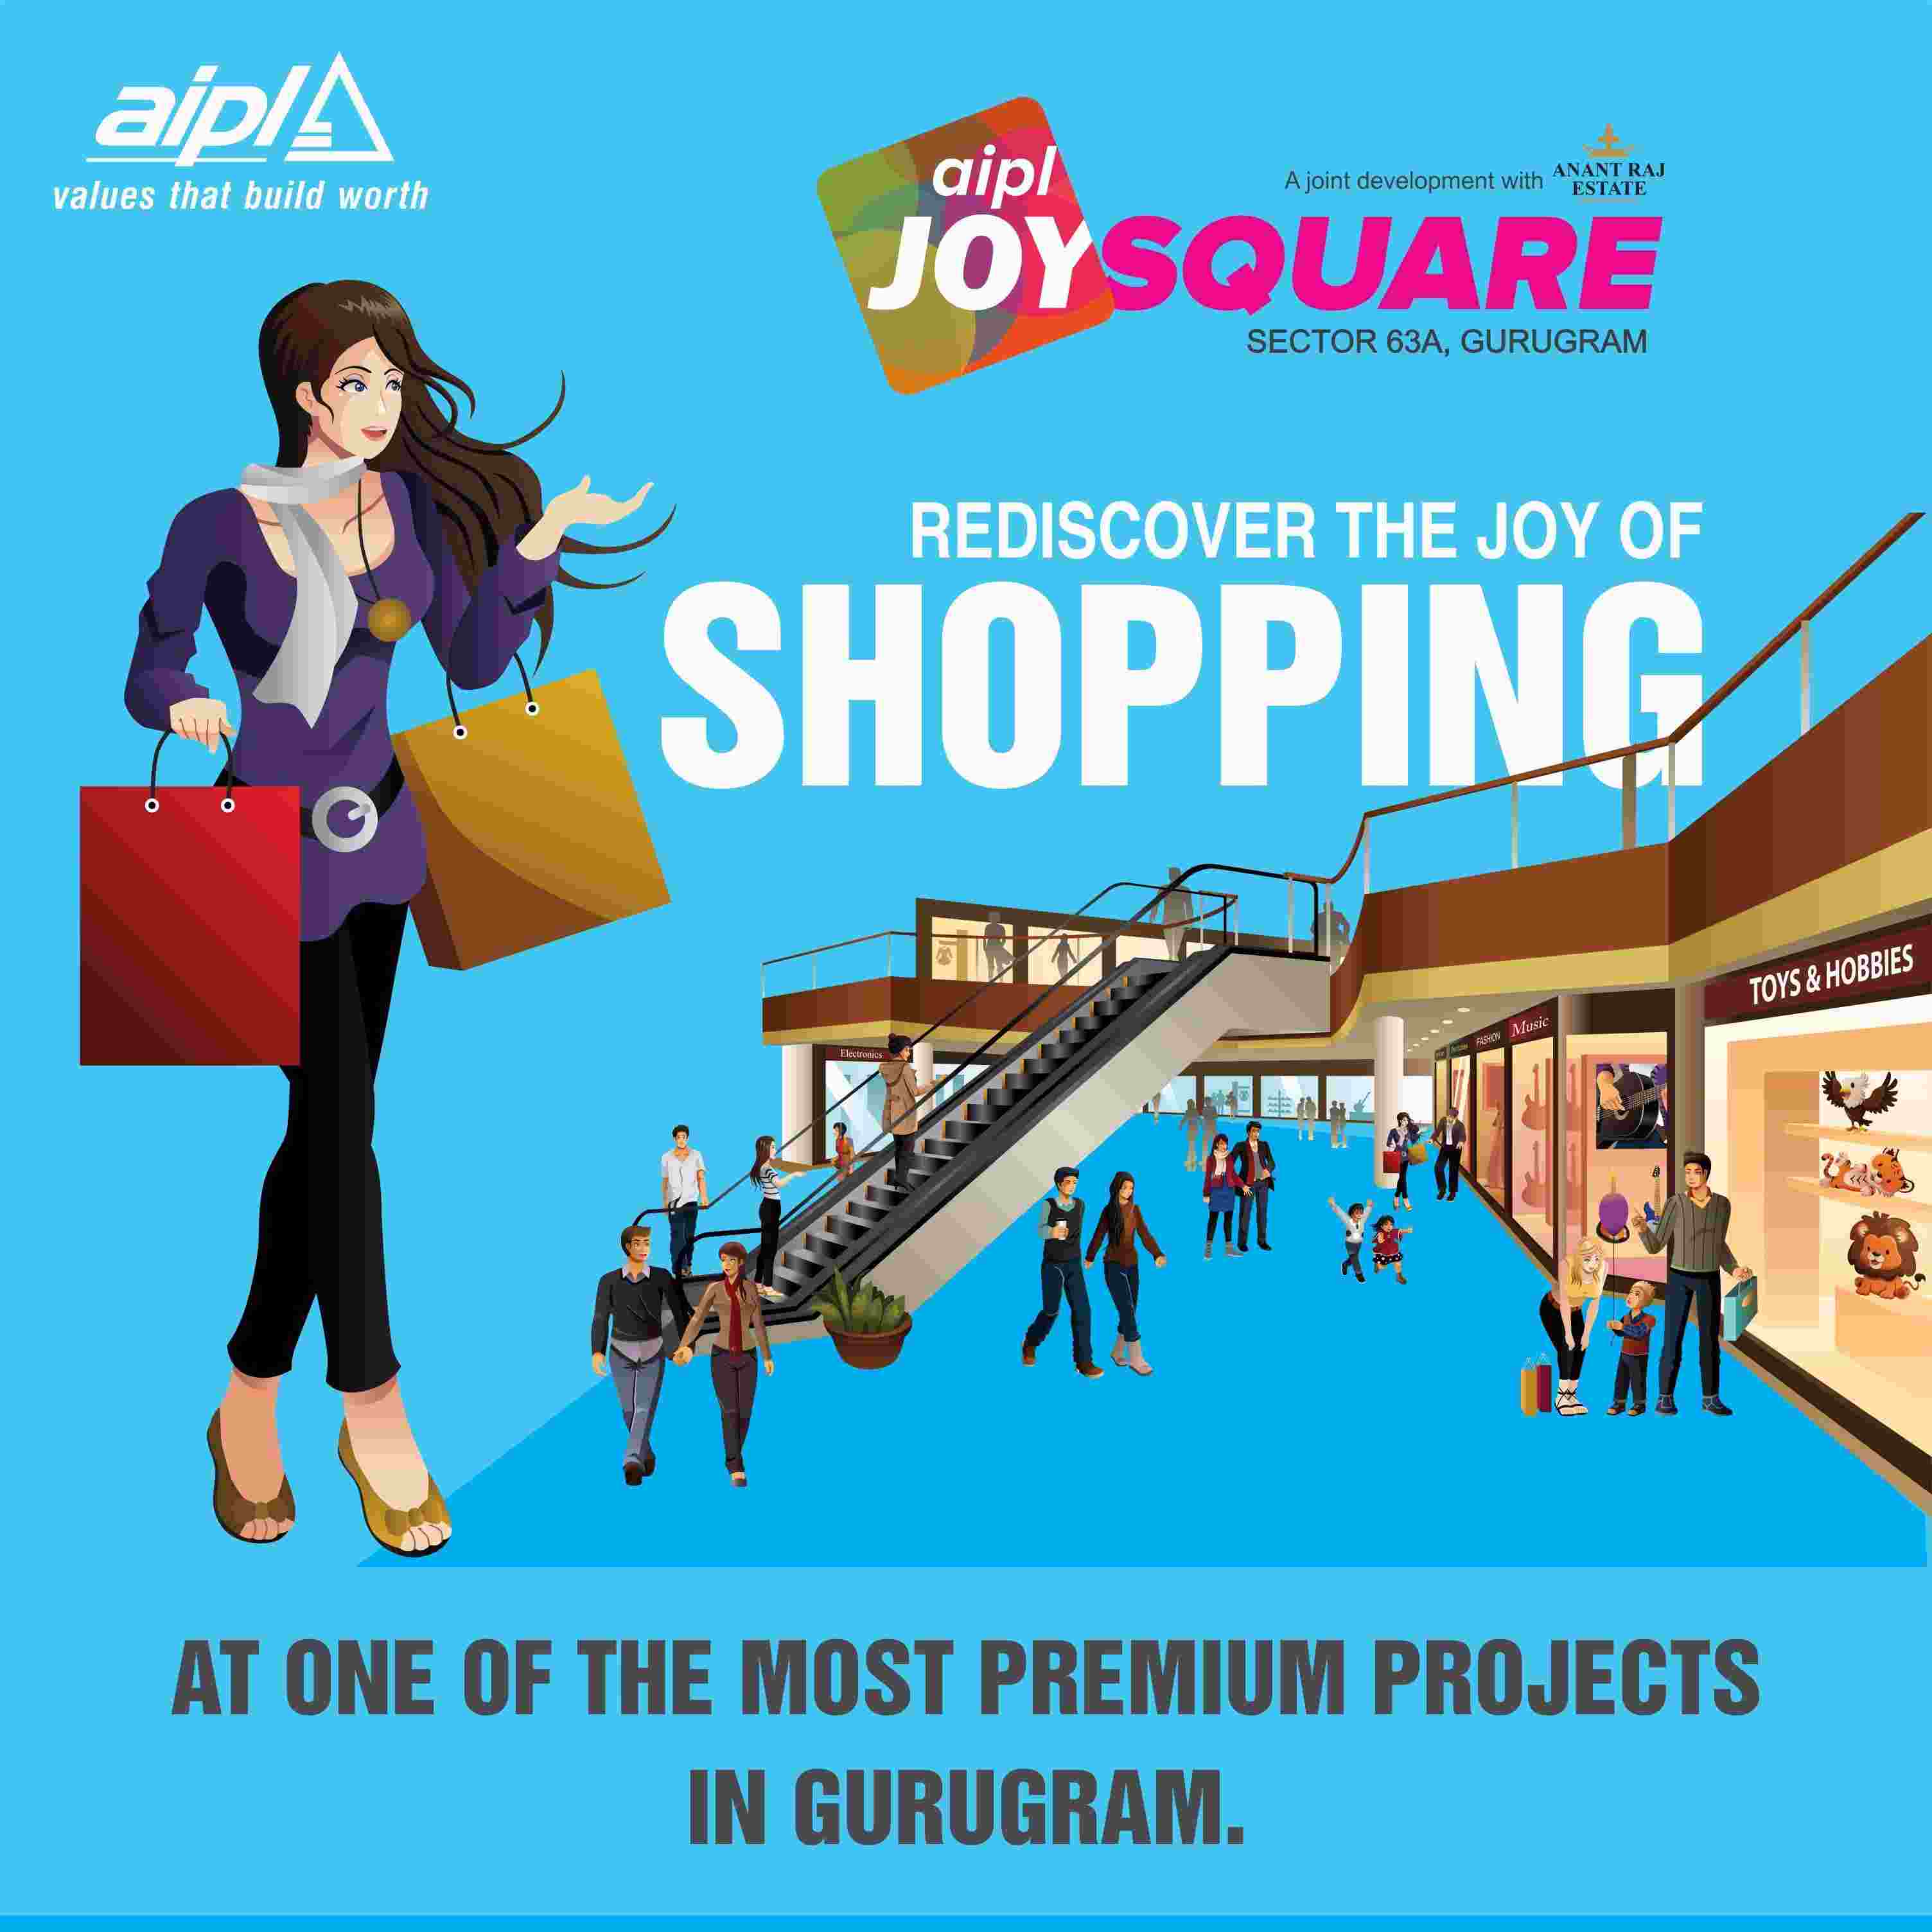 Rediscover the joy of shopping at AIPL Joy Square which is one of the most premium projects in Gurugram